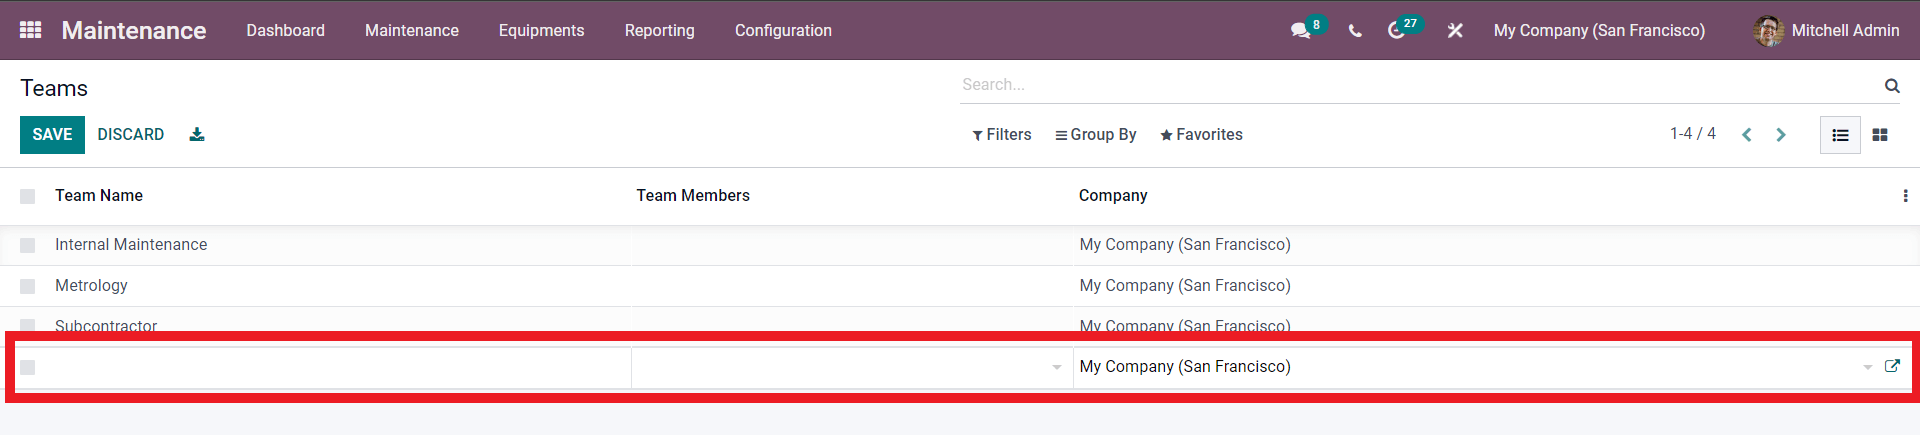 how-to-manage-equipment-with-the-odoo-15-maintenance-module